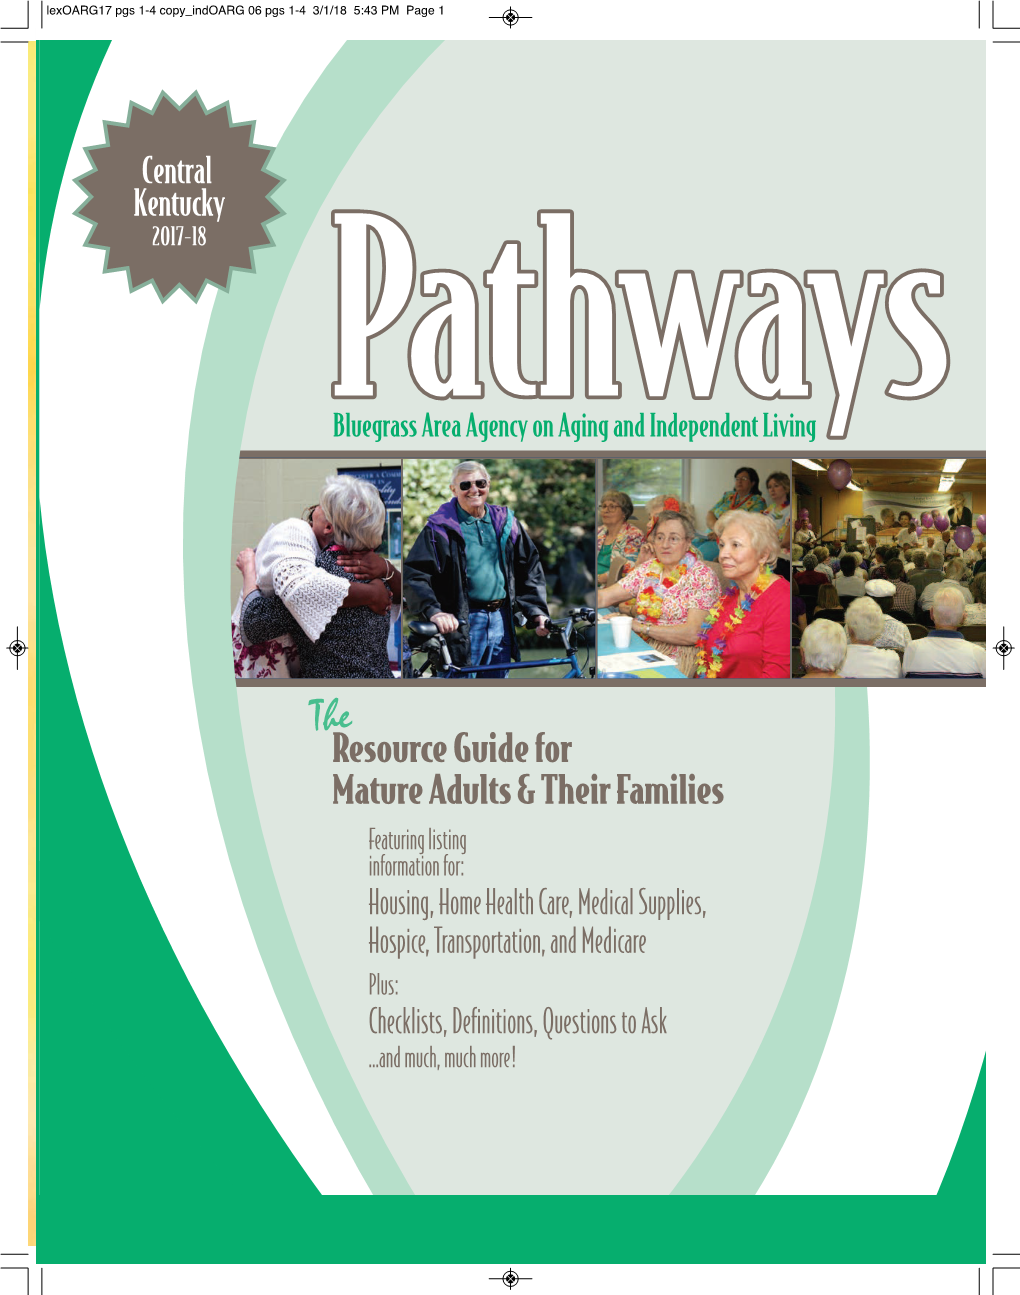 Pathways - Information for Older Adults 2017-18 Edition Lexoarg17 Pgs 1-4 Copy Indoarg 06 Pgs 1-4 3/1/18 5:43 PM Page 3